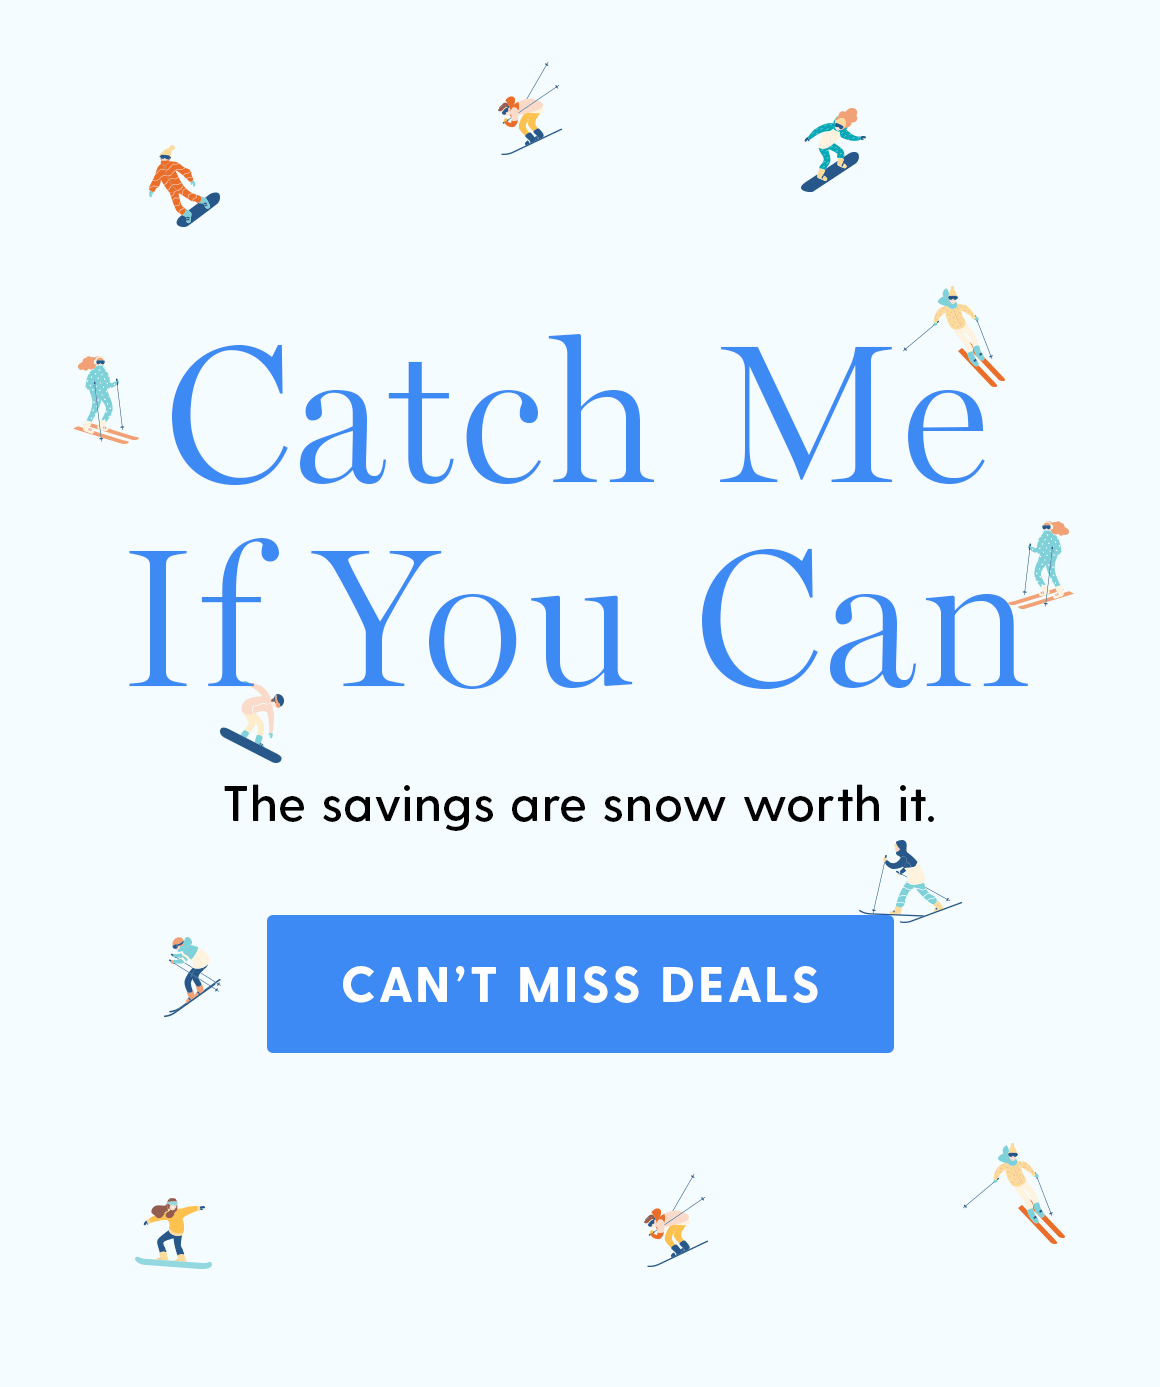 Catch Me If You Can. The savings are snow worth it. CAN'T MISS DEALS.